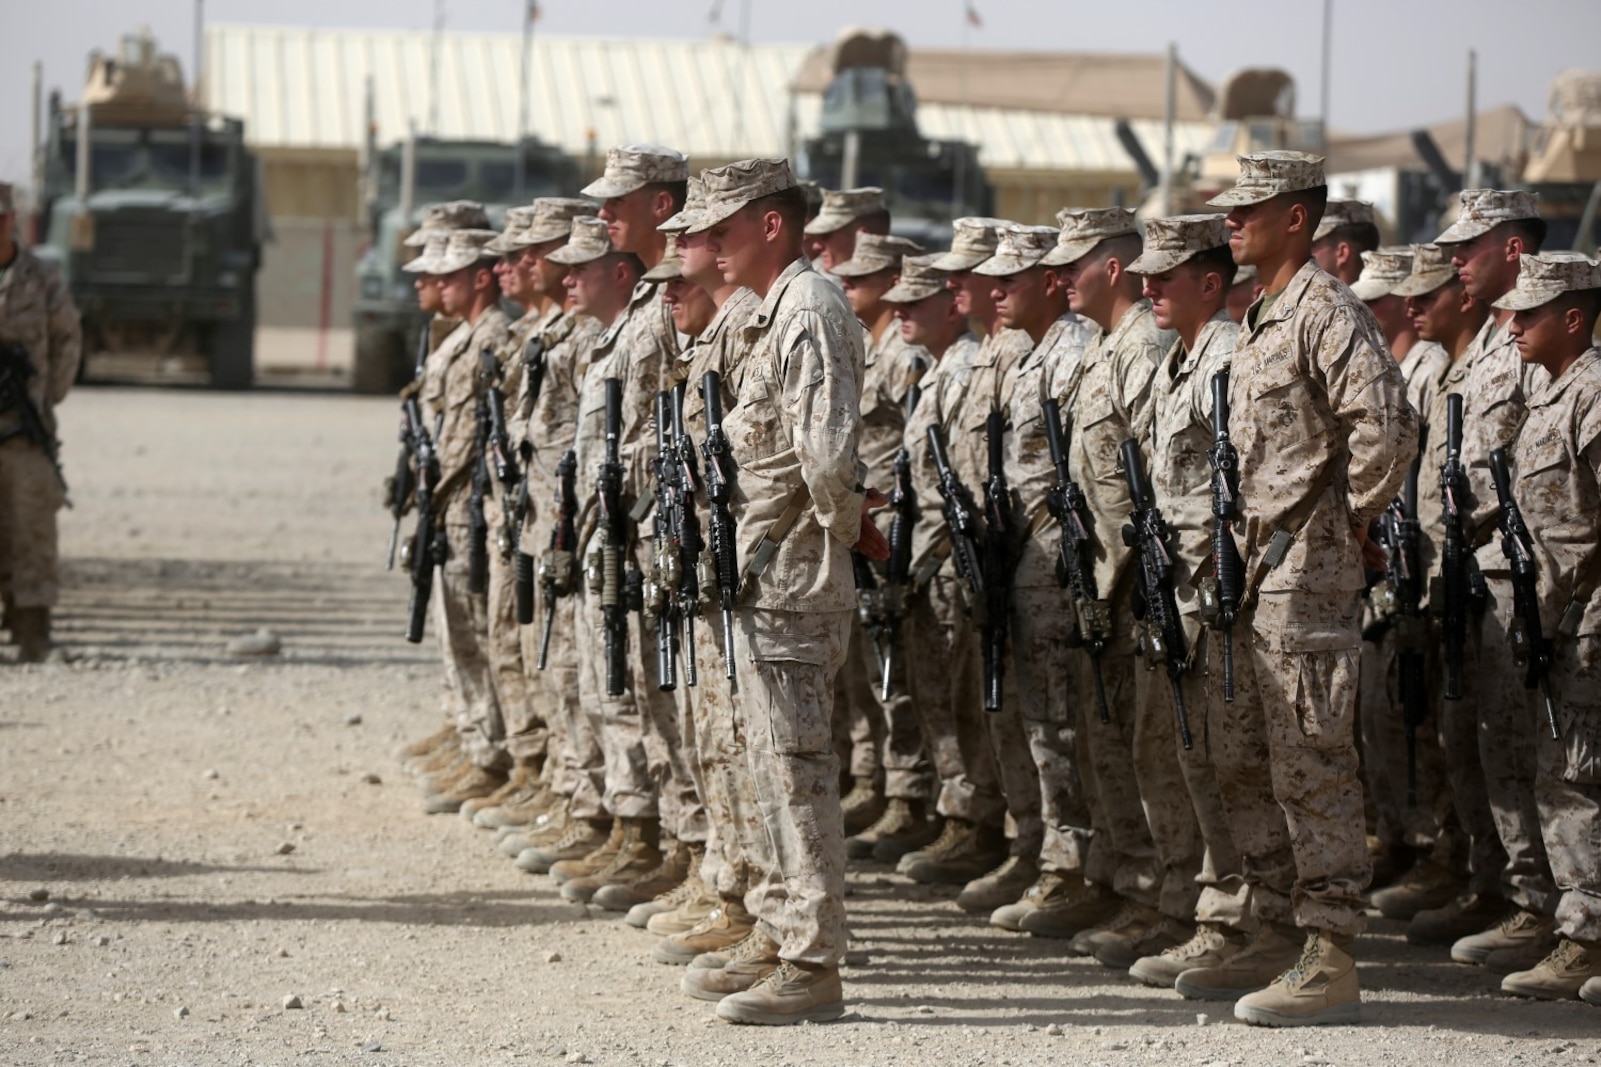 Marines with 1st Battalion, 7th Marine Regiment, stand at parade rest during a memorial ceremony aboard Camp Leatherneck, July 2, 2014. The memorial was in honor of Sgt. Thomas Z. Spitzer, a professionally instructed gunman with Scout Sniper Platoon, 1st Bn., 7th Marines, who was killed while conducting combat operations in Helmand province, Afghanistan, June 25, 2014.
(U.S. Marine Corps photo by Cpl. Joseph Scanlan / released)